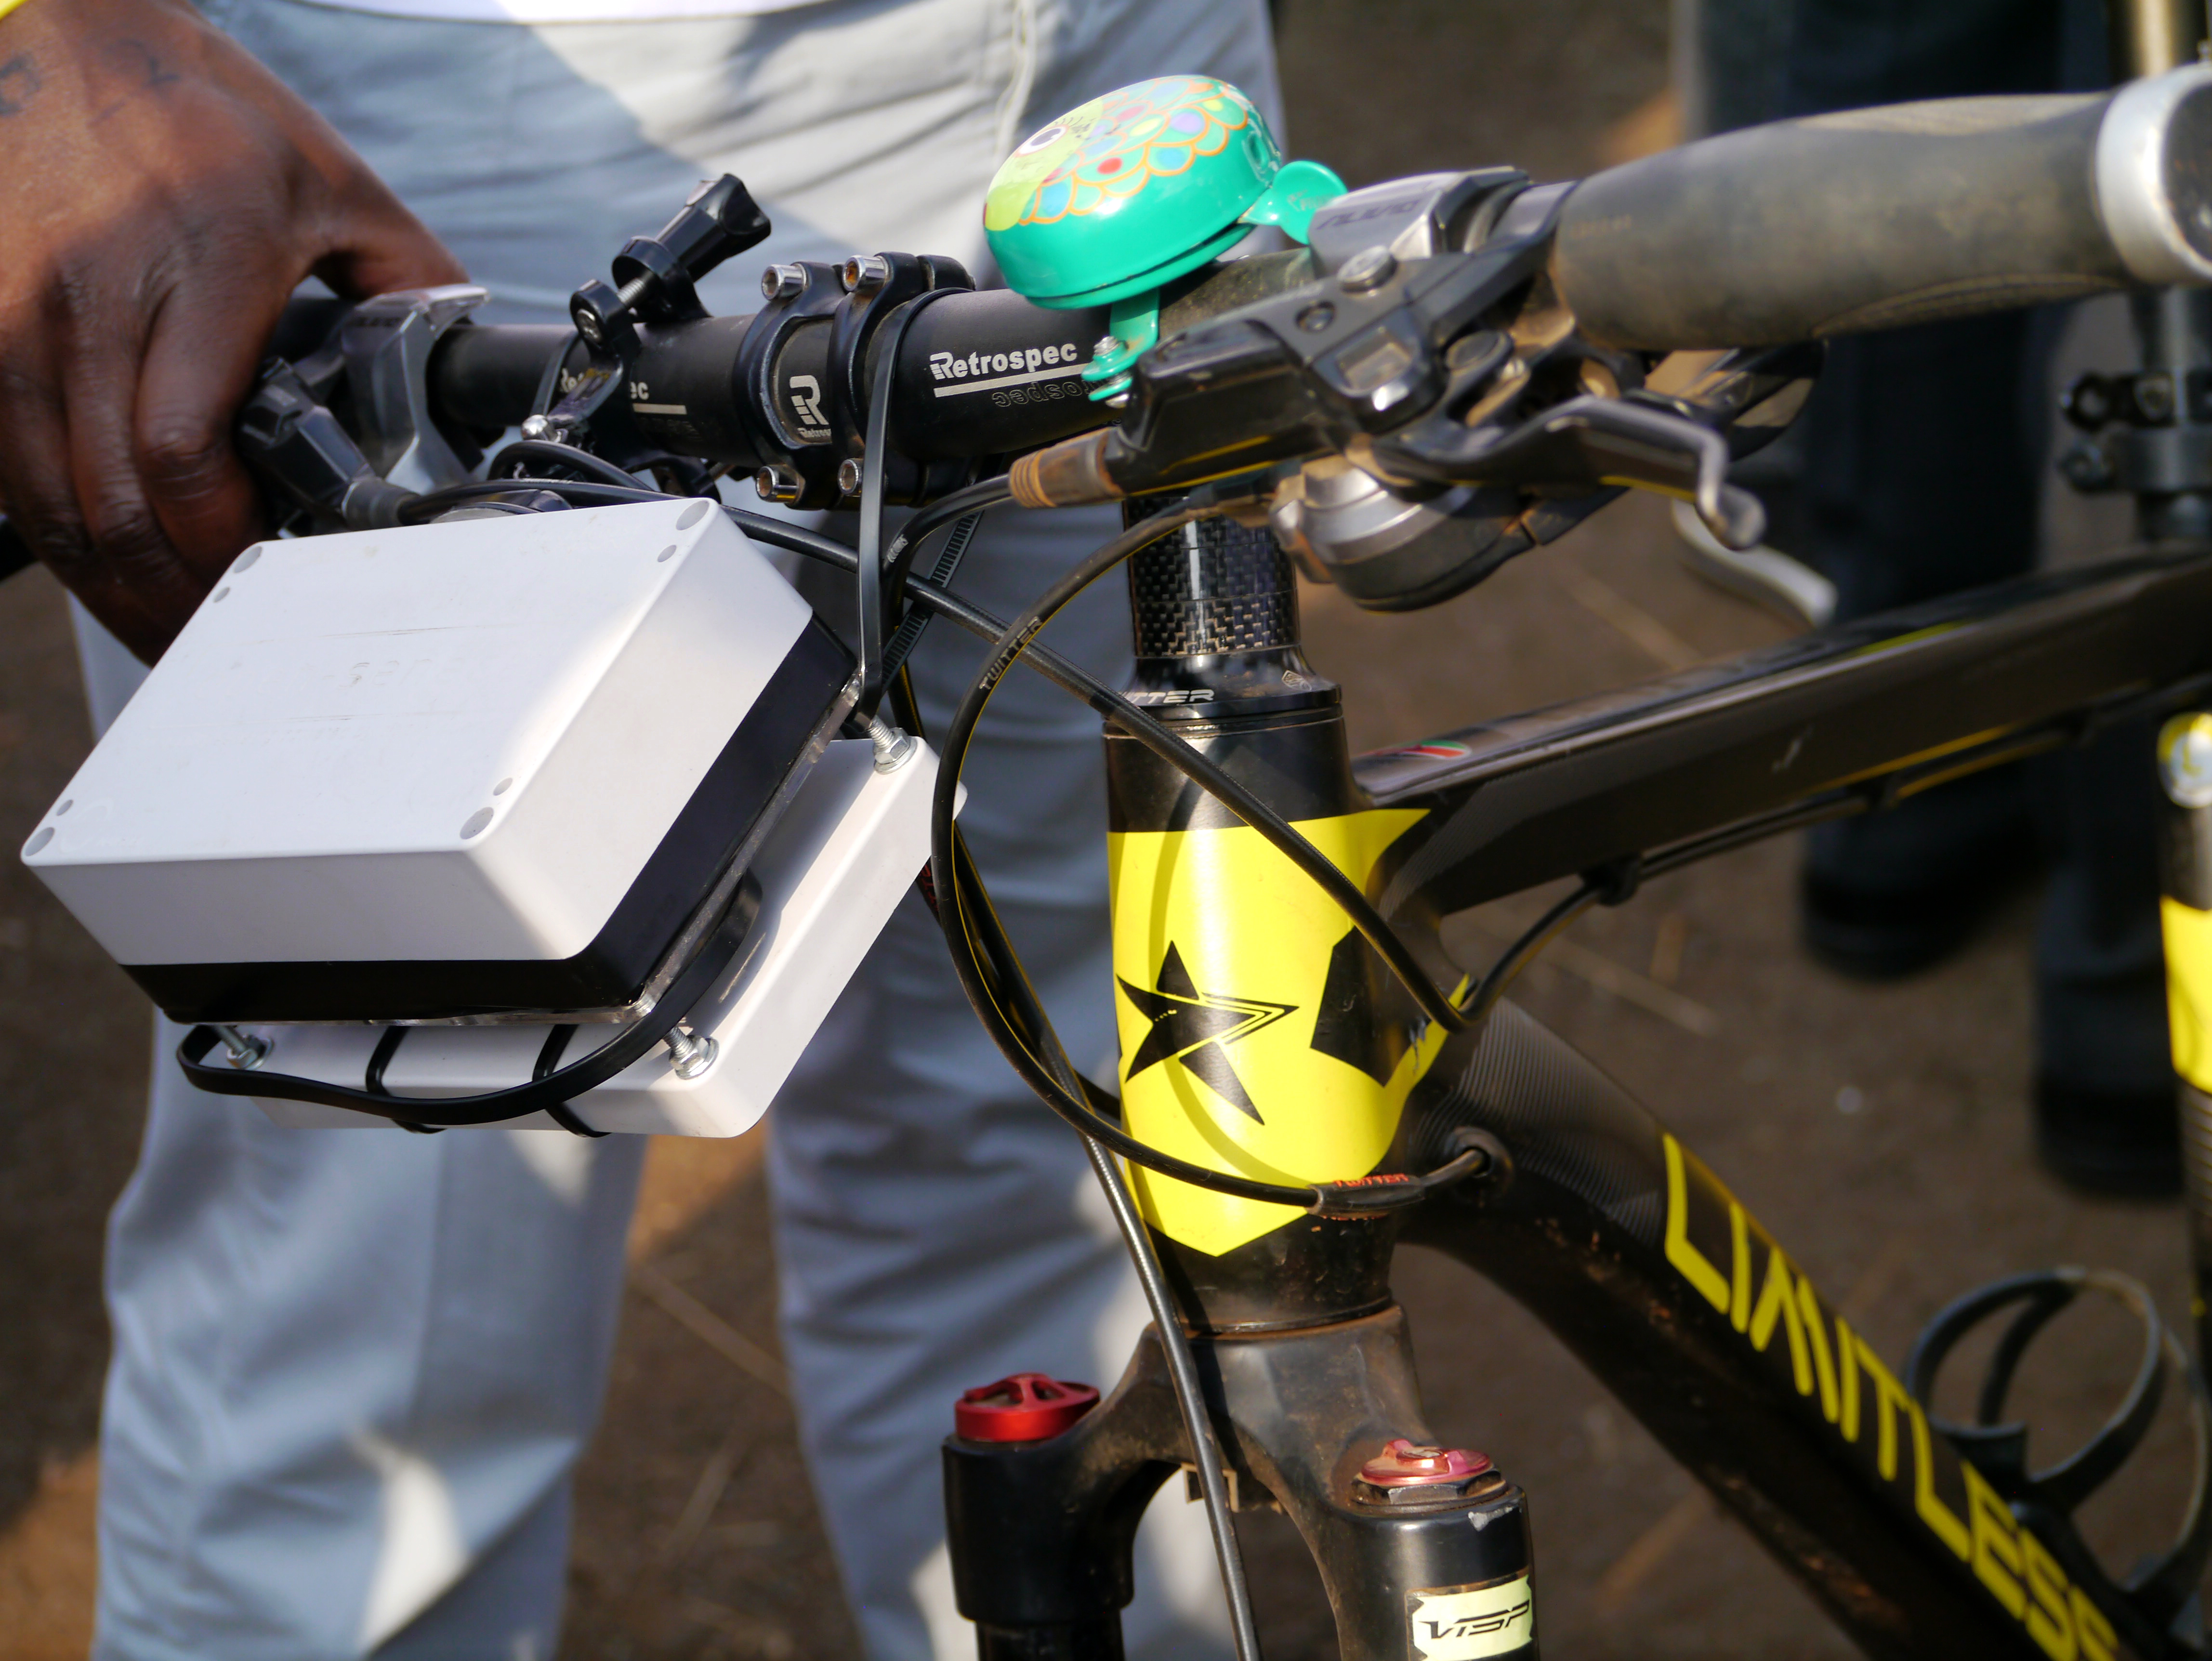 Air Pollution Monitoring Sensor mounted on a bicycle